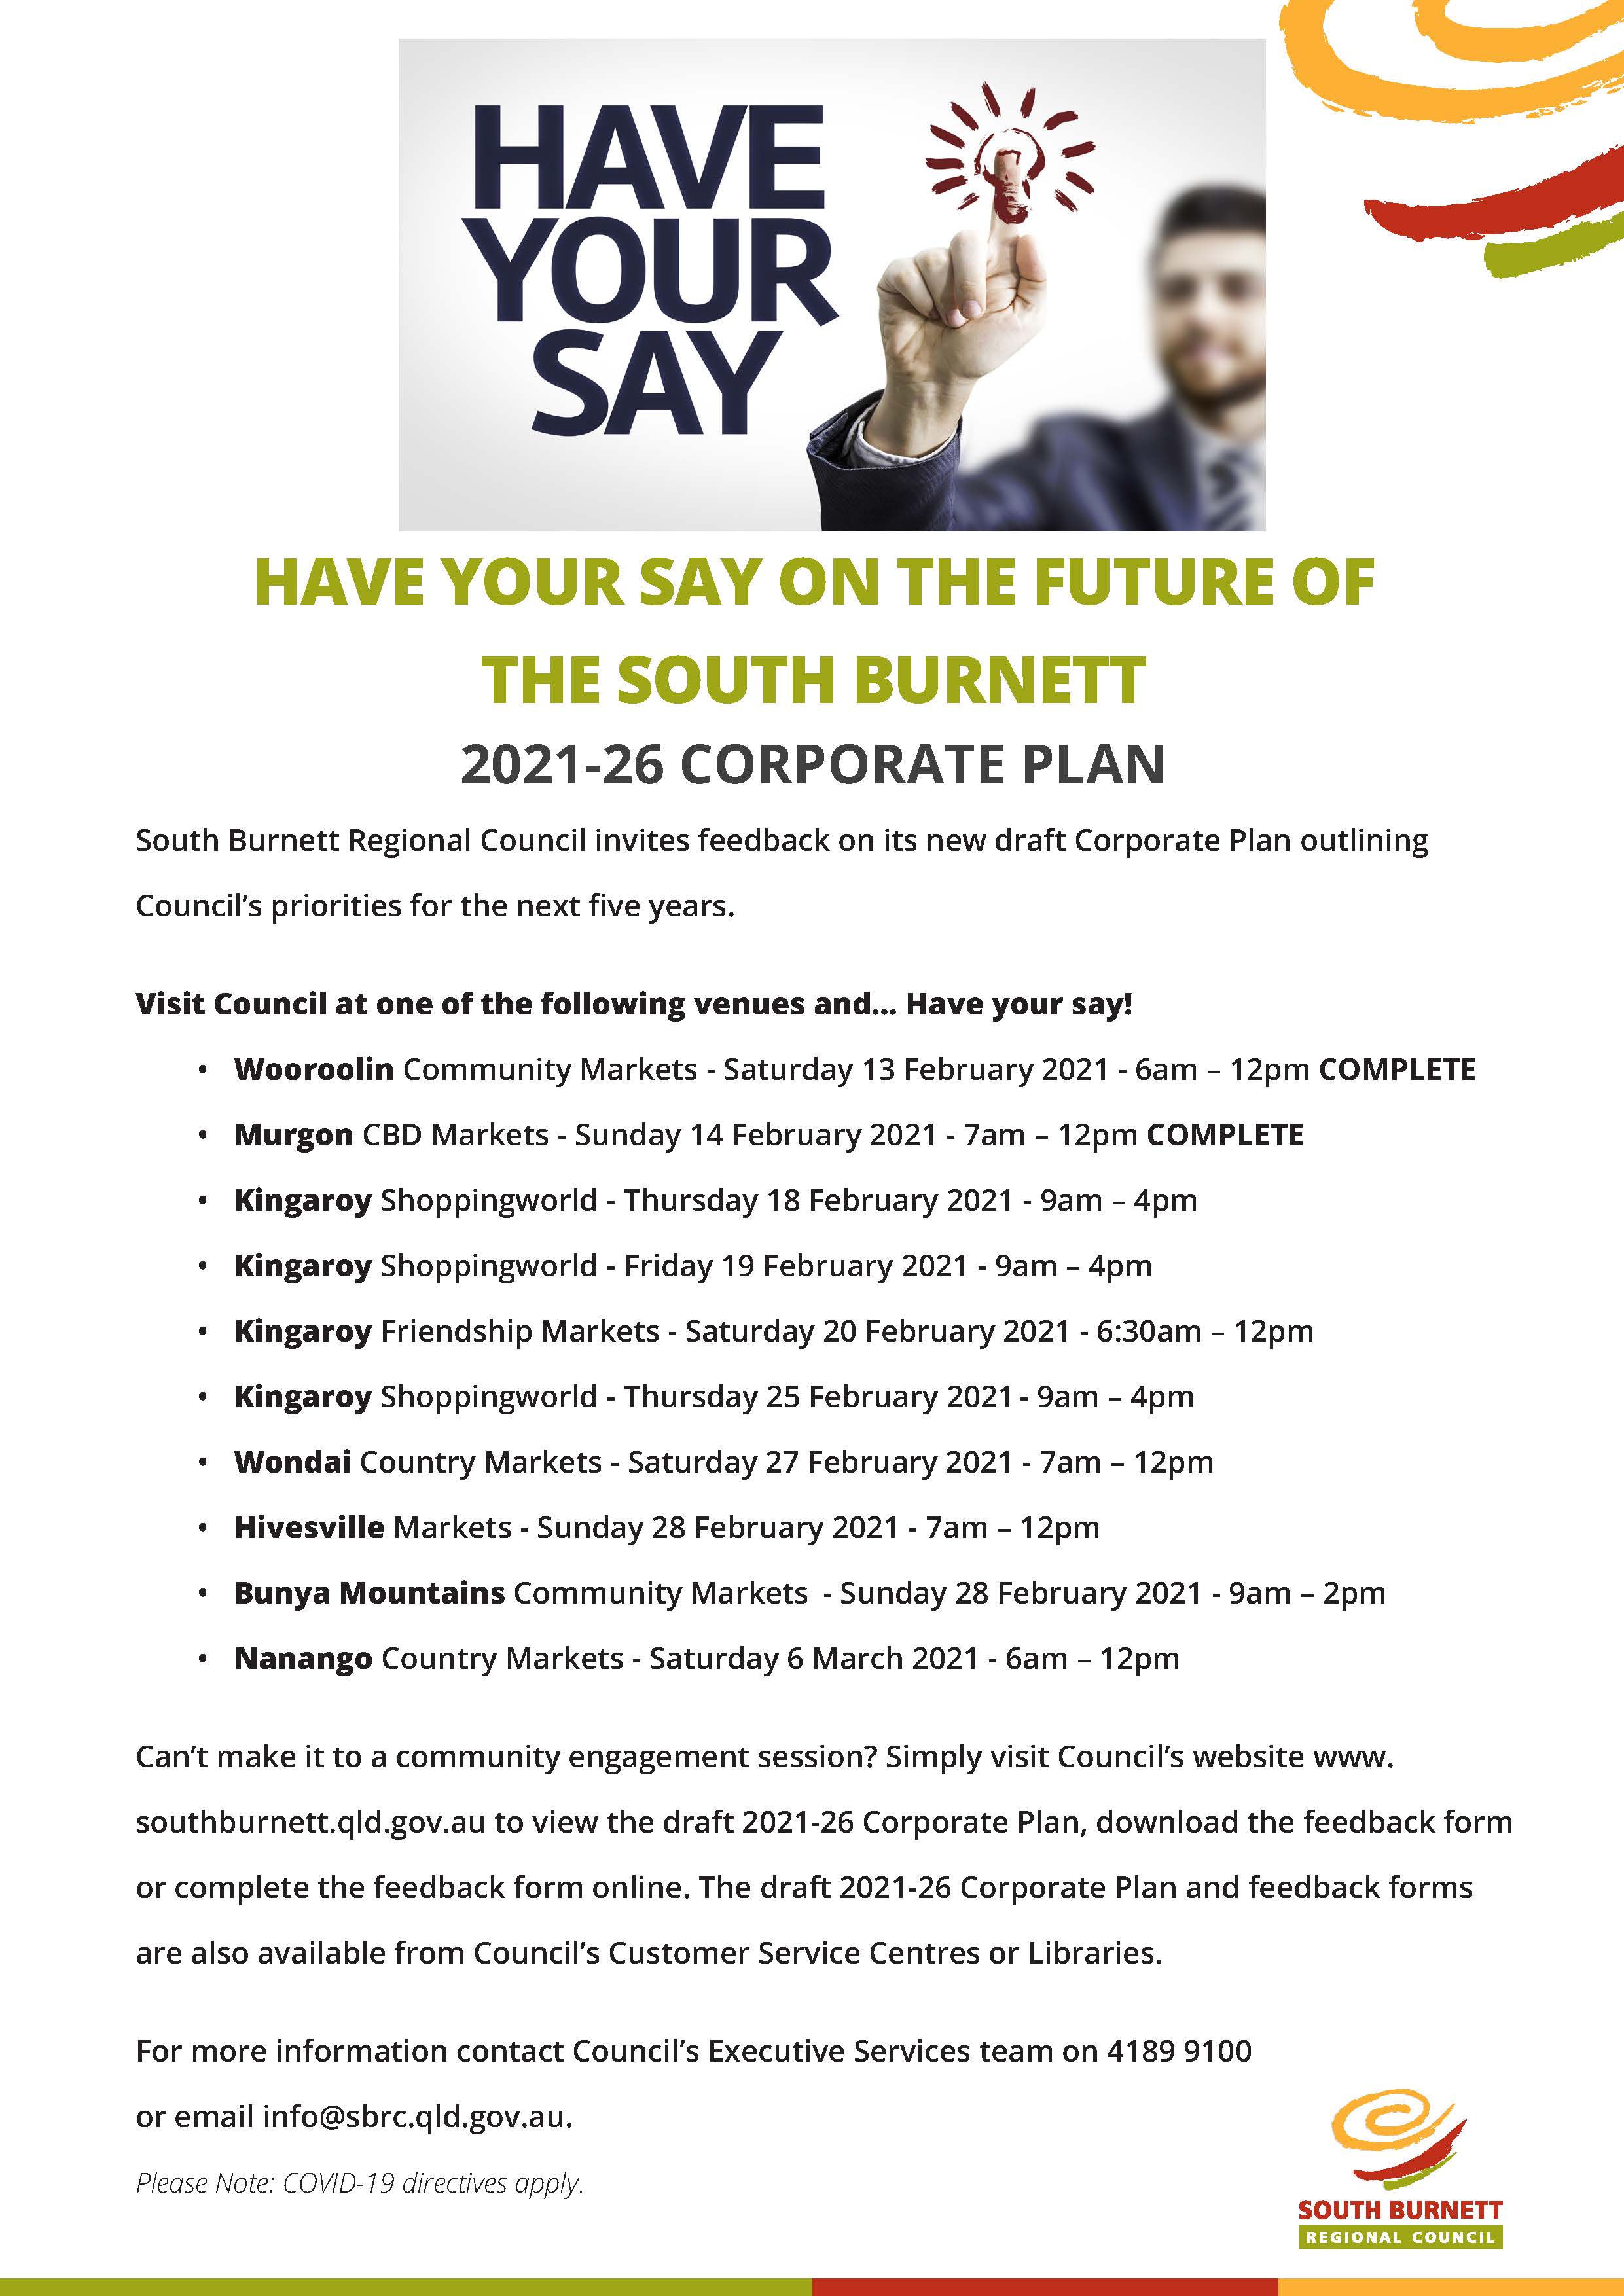 Have your say - Draft 2021-26 Corporate Plan Community Engagement Events